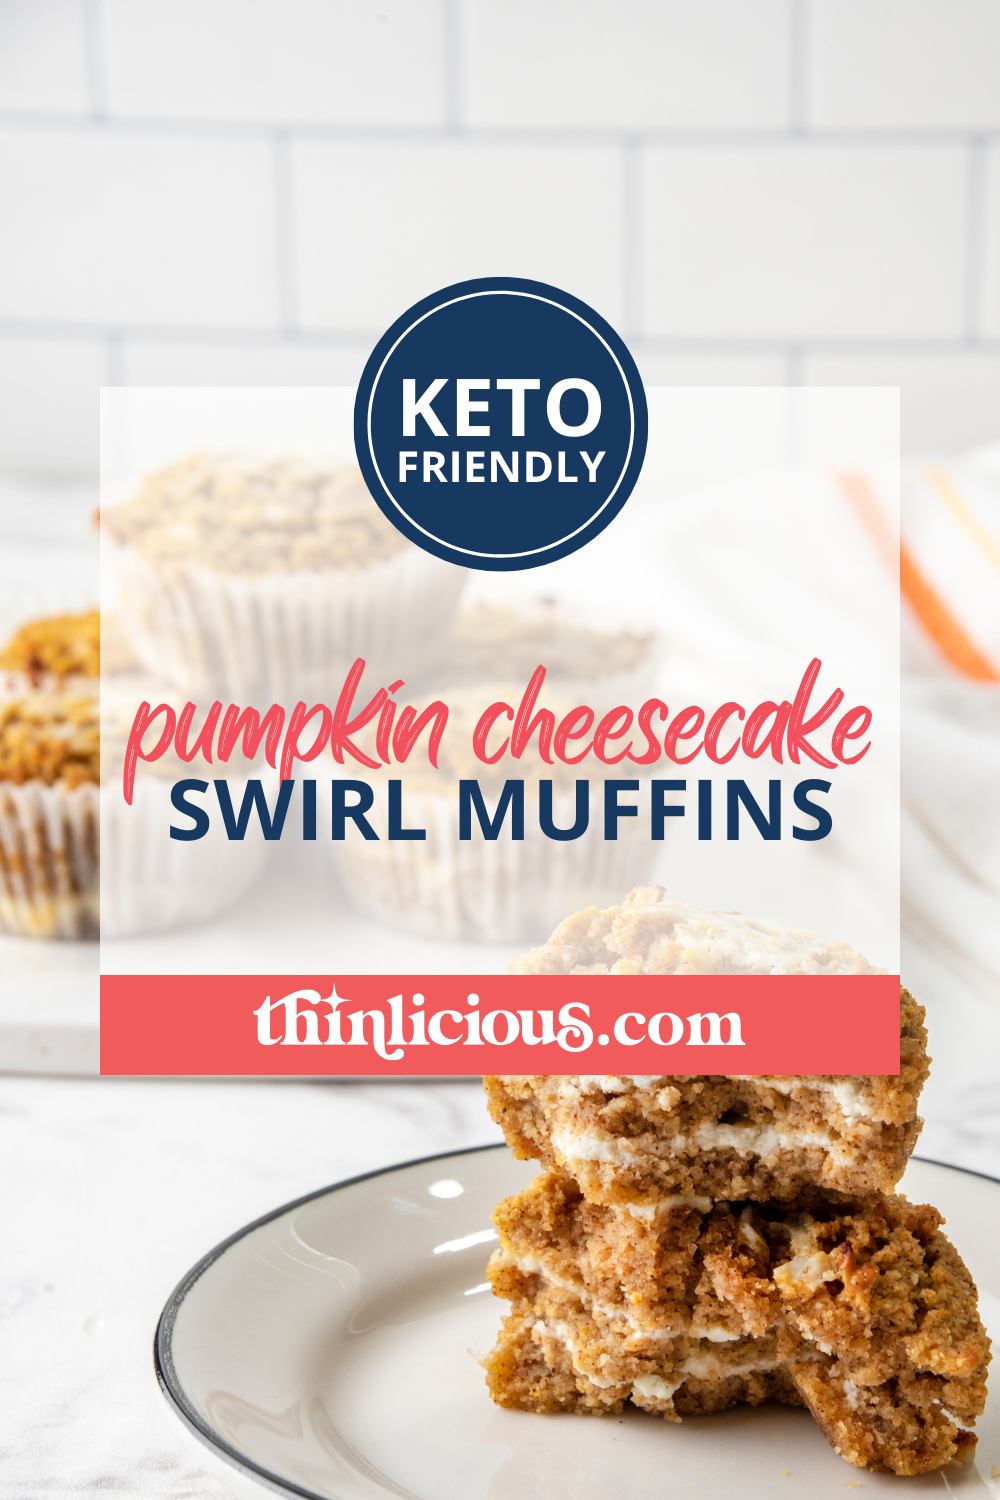 Pumpkin spice and everything nice! Pumpkin cream cheese swirl muffins will make you glad you eating low-carb! They're the perfect fall dessert.